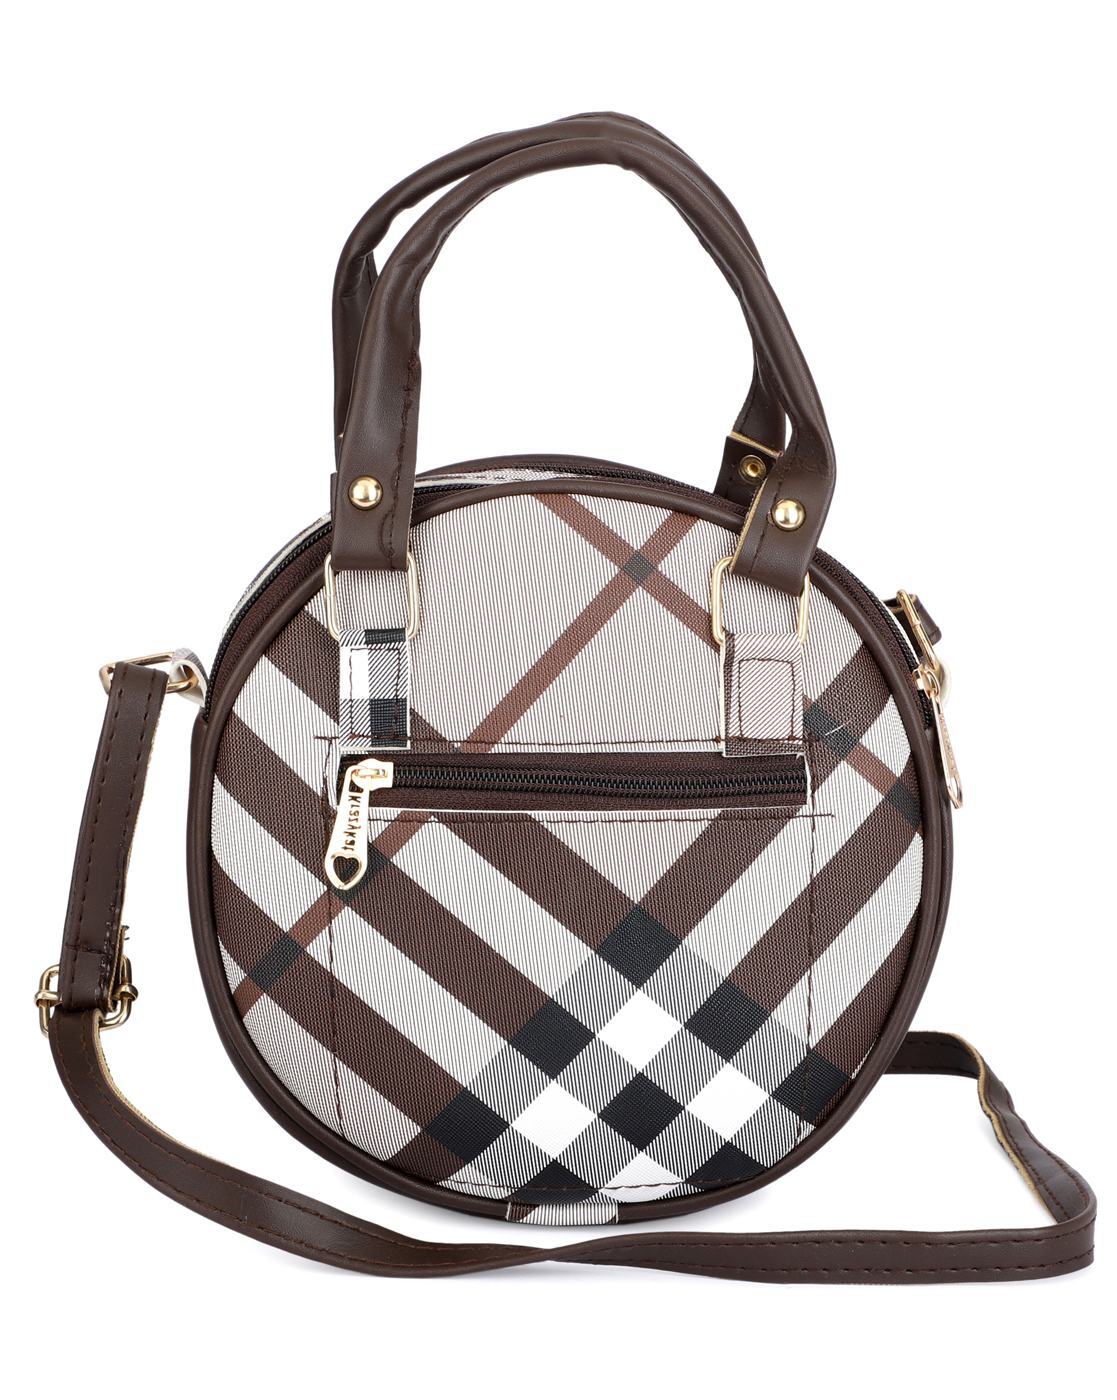 Burberry - Orchard Small House Check Bridle Bag Black